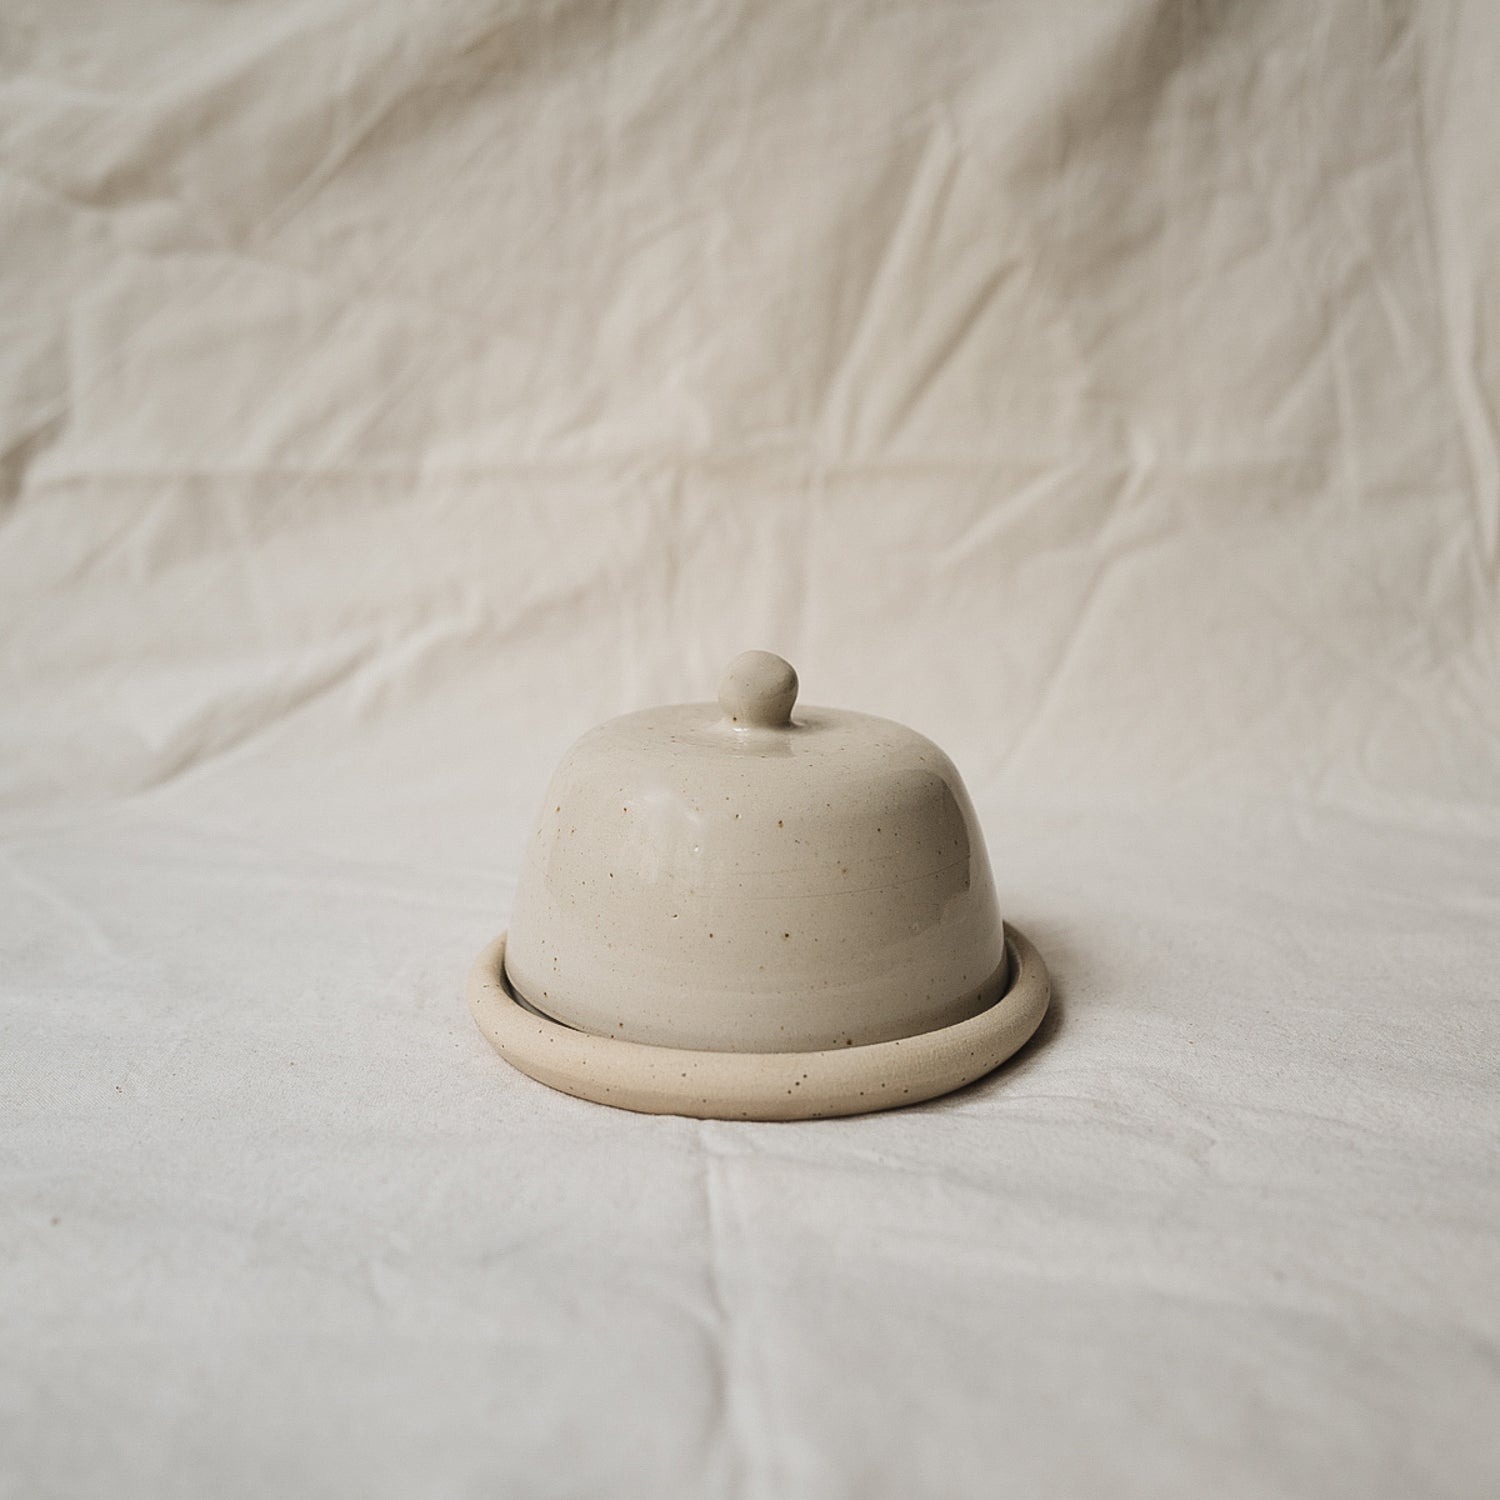 The picture shows the Butter Dish from the collaboration between Viola Beuscher Ceramics and Maison Palme.